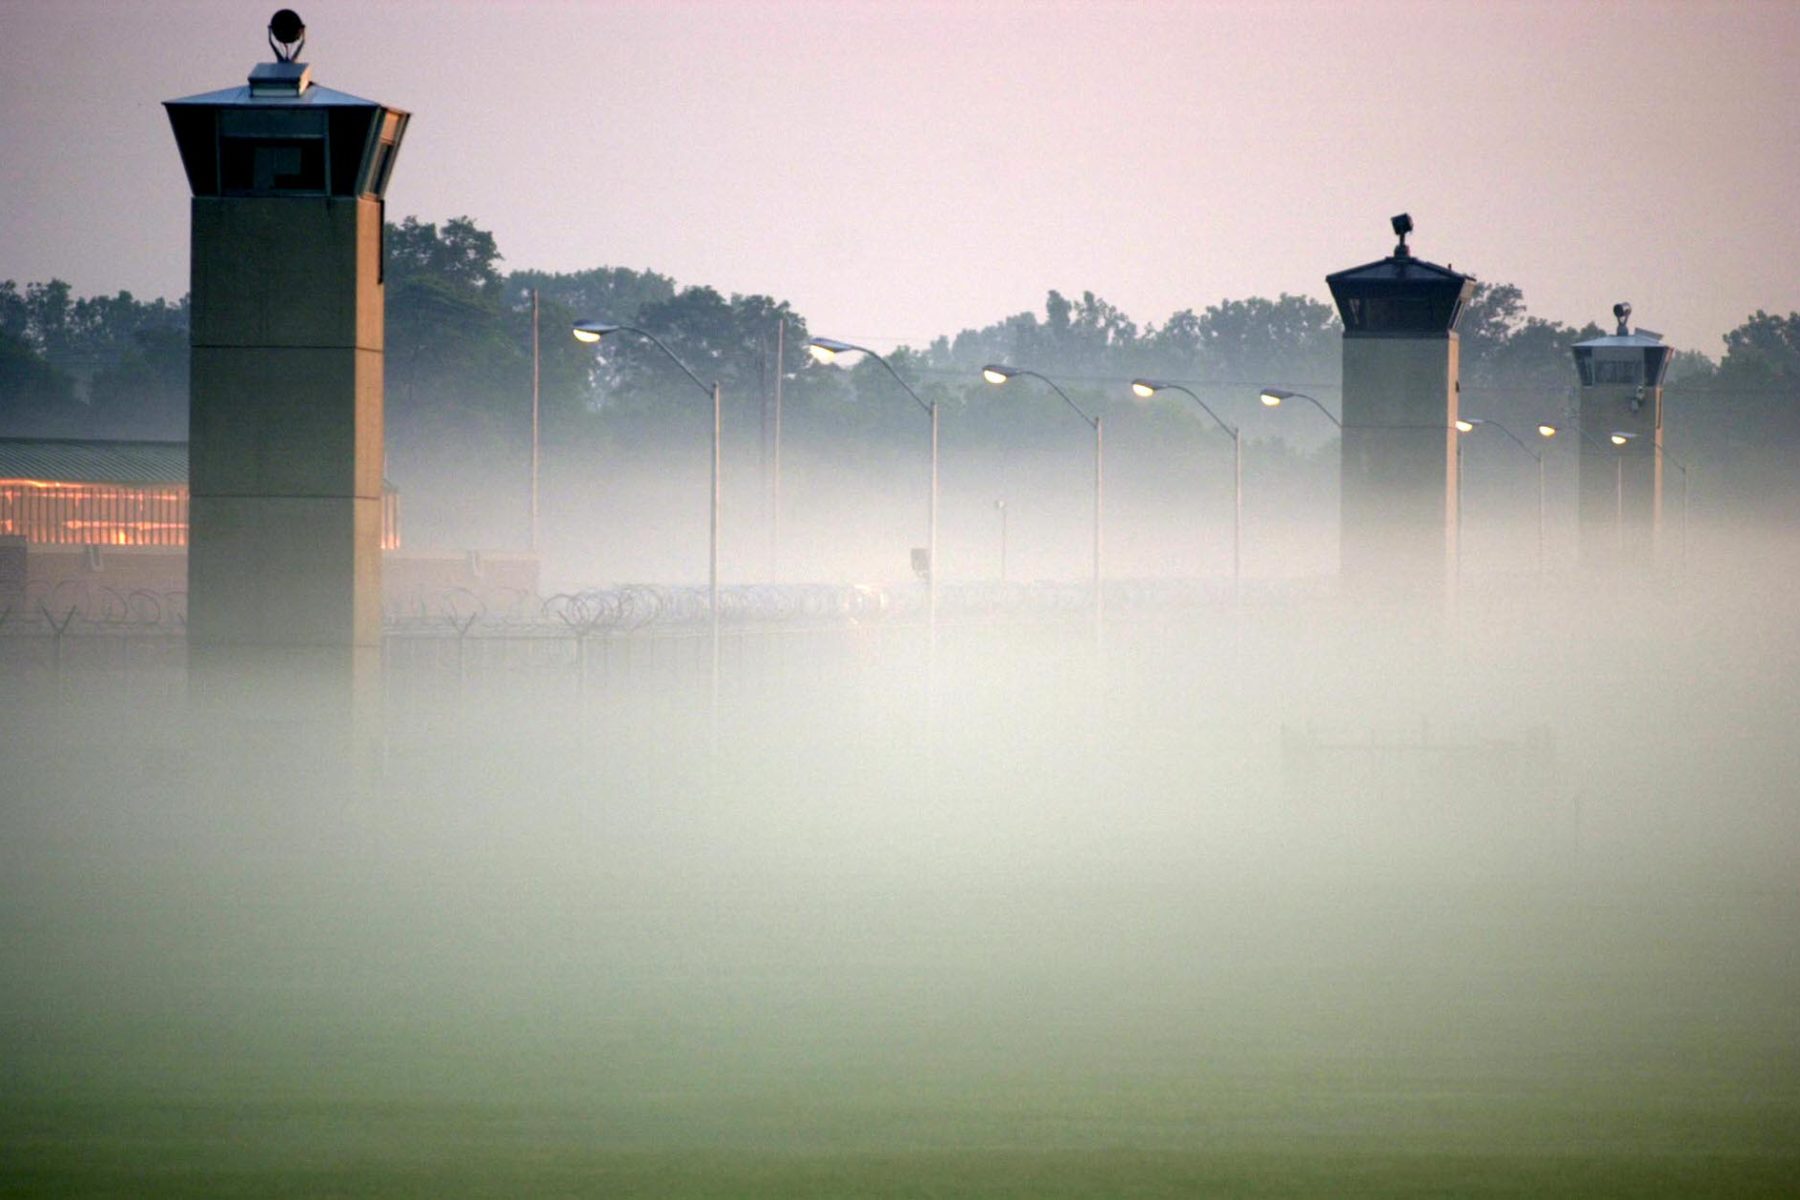 Guard towers surrounding the Federal Prison in Terre Haute, Indiana.